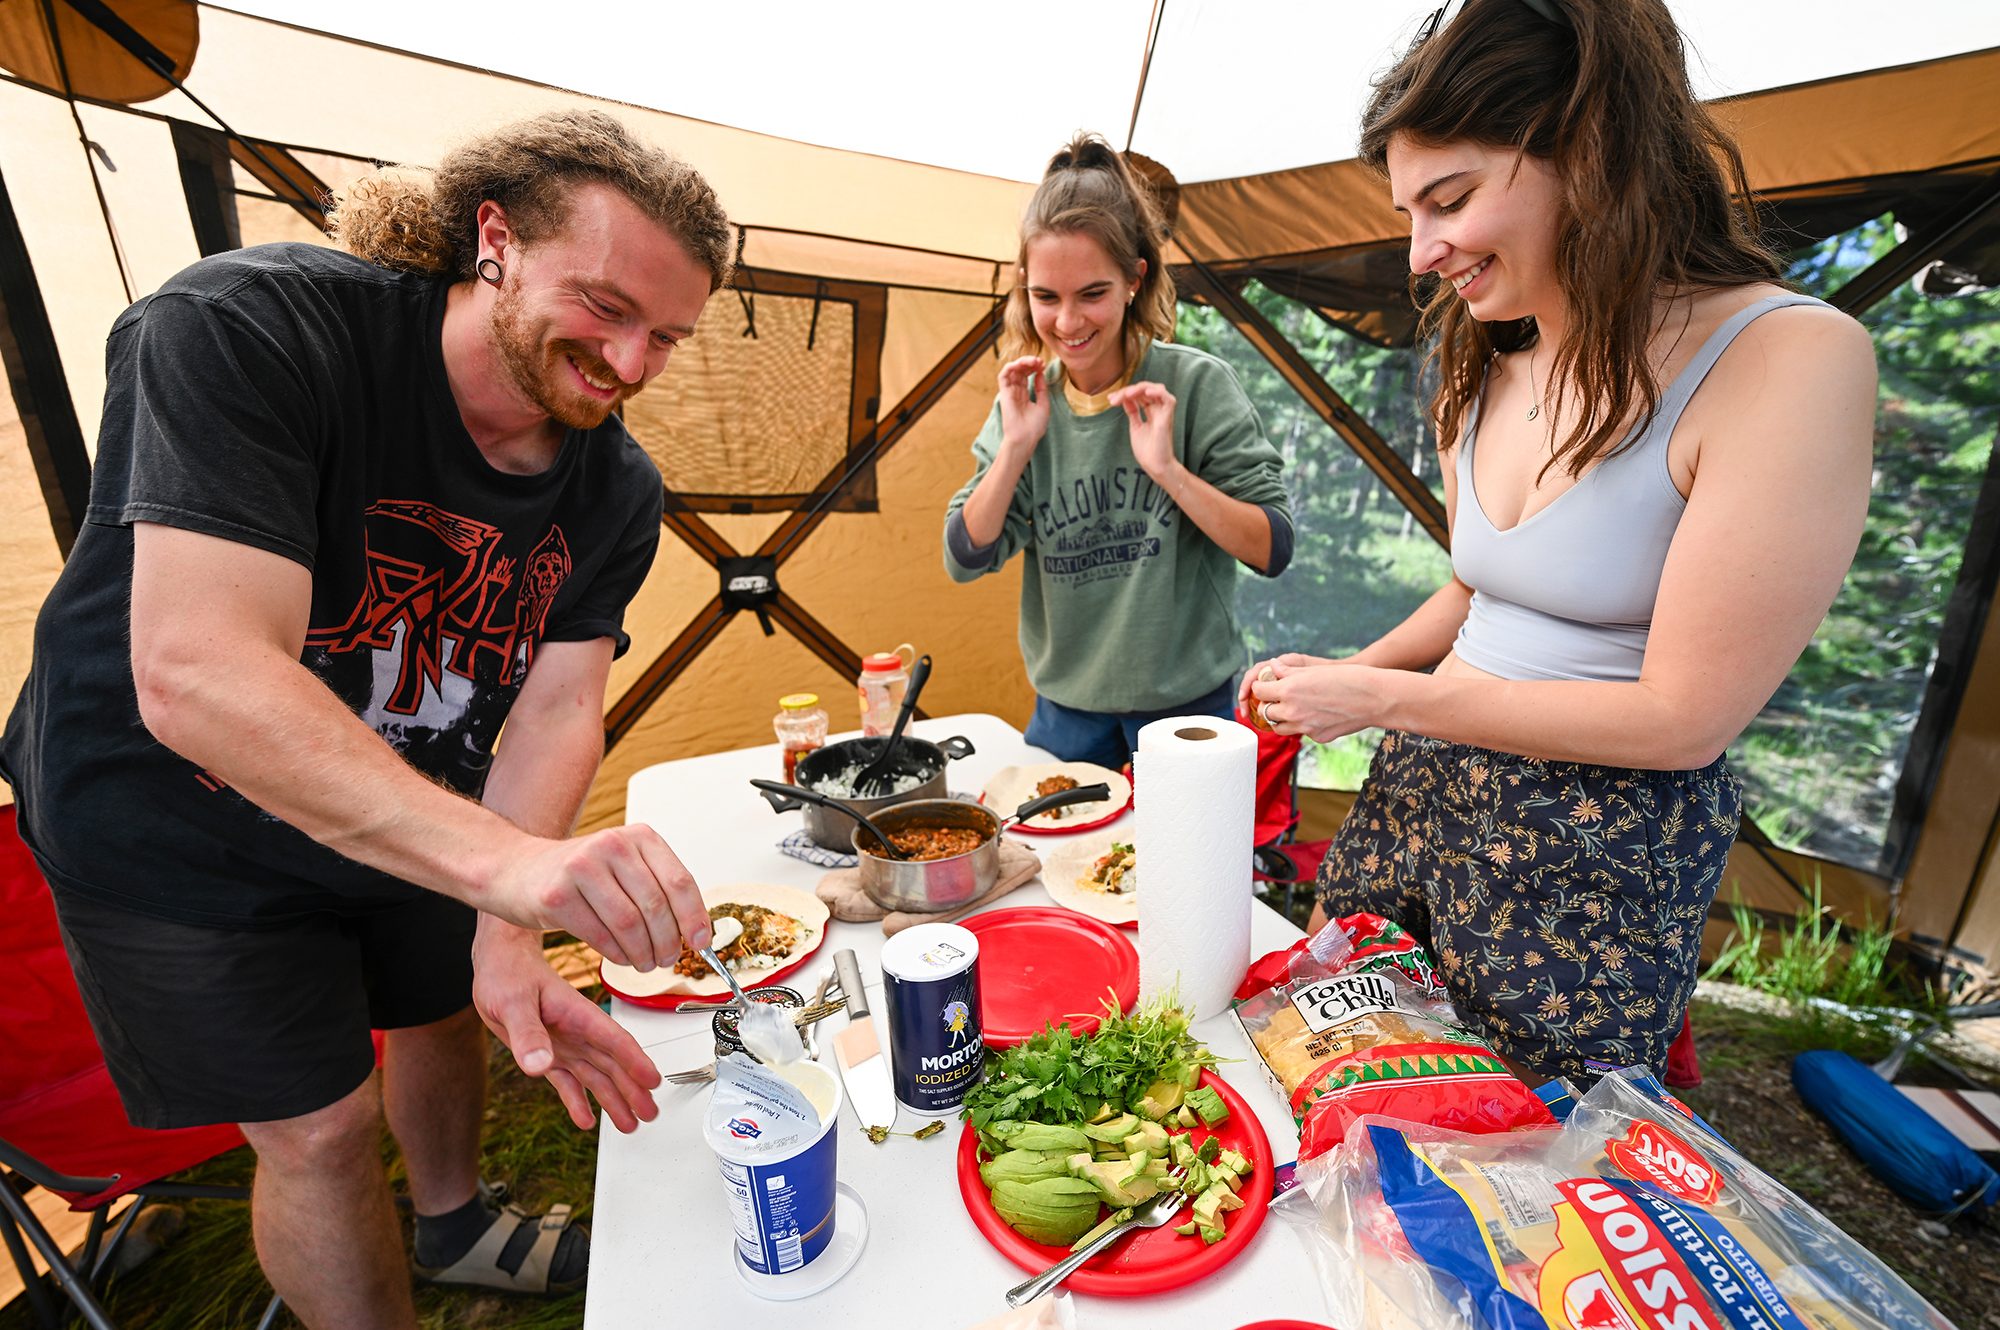 In a large brown tent beside the RV, Timon Keller, Lucy McGuire and Arielle Link add condiments to their burrito dinner. The researchers all look excitedly at the collapsible table before them which is full of sliced avocado, cilantro, sour cream, tortillas, chips, salsa, rice and beans.